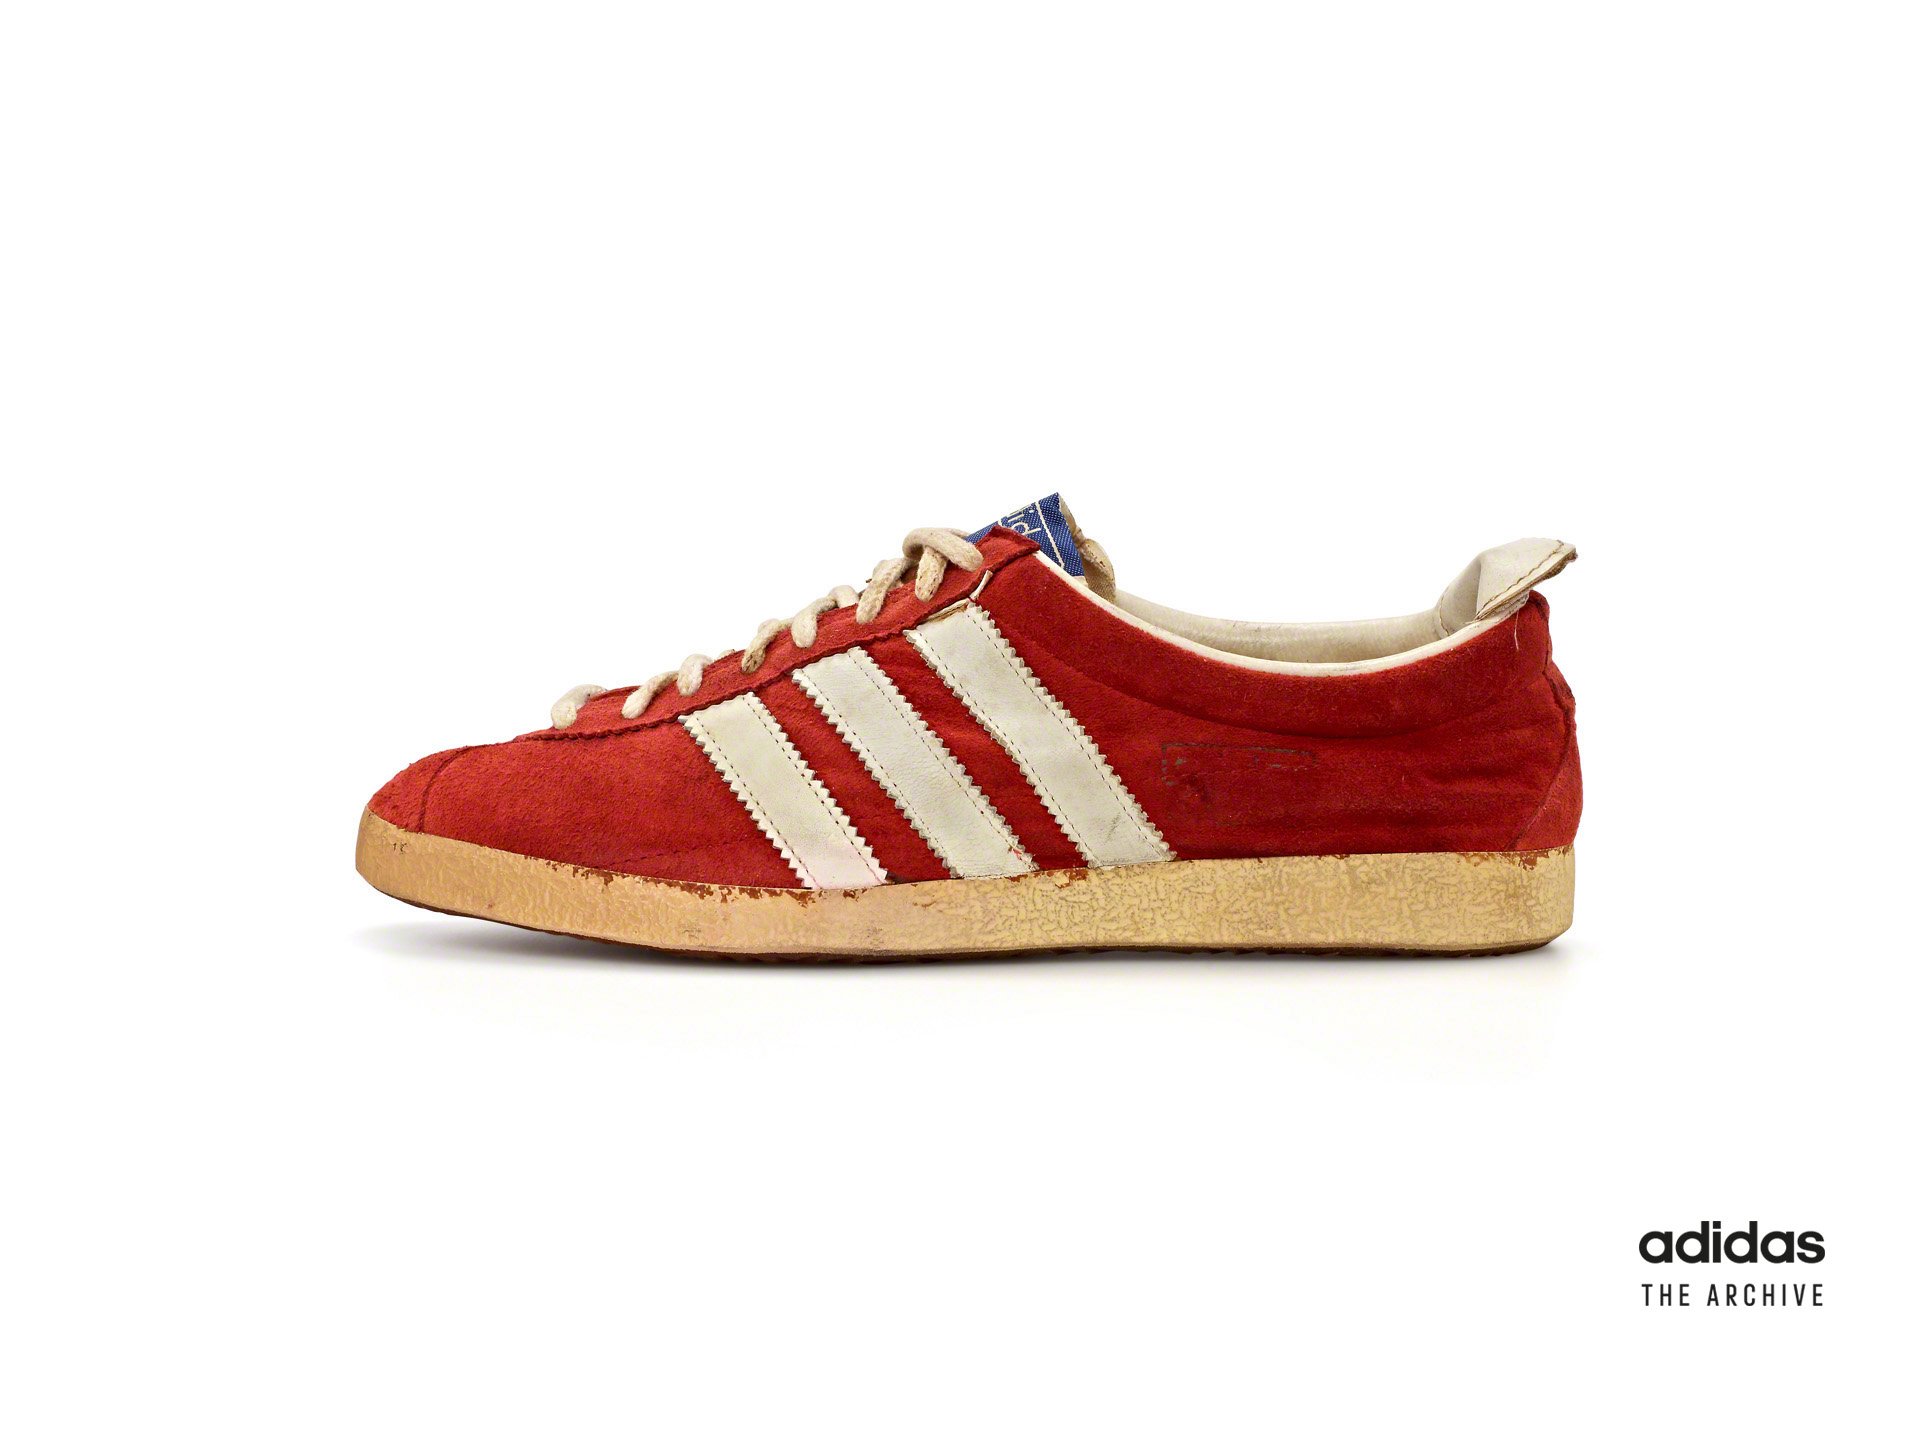 rebanada Juventud Significado adidas on Twitter: "1950, Samba​ ​ The '50s became a boom of technology,  innovating equipment for world class athletes. adidas' first decade  delivered the Samba which soccer players today still use for